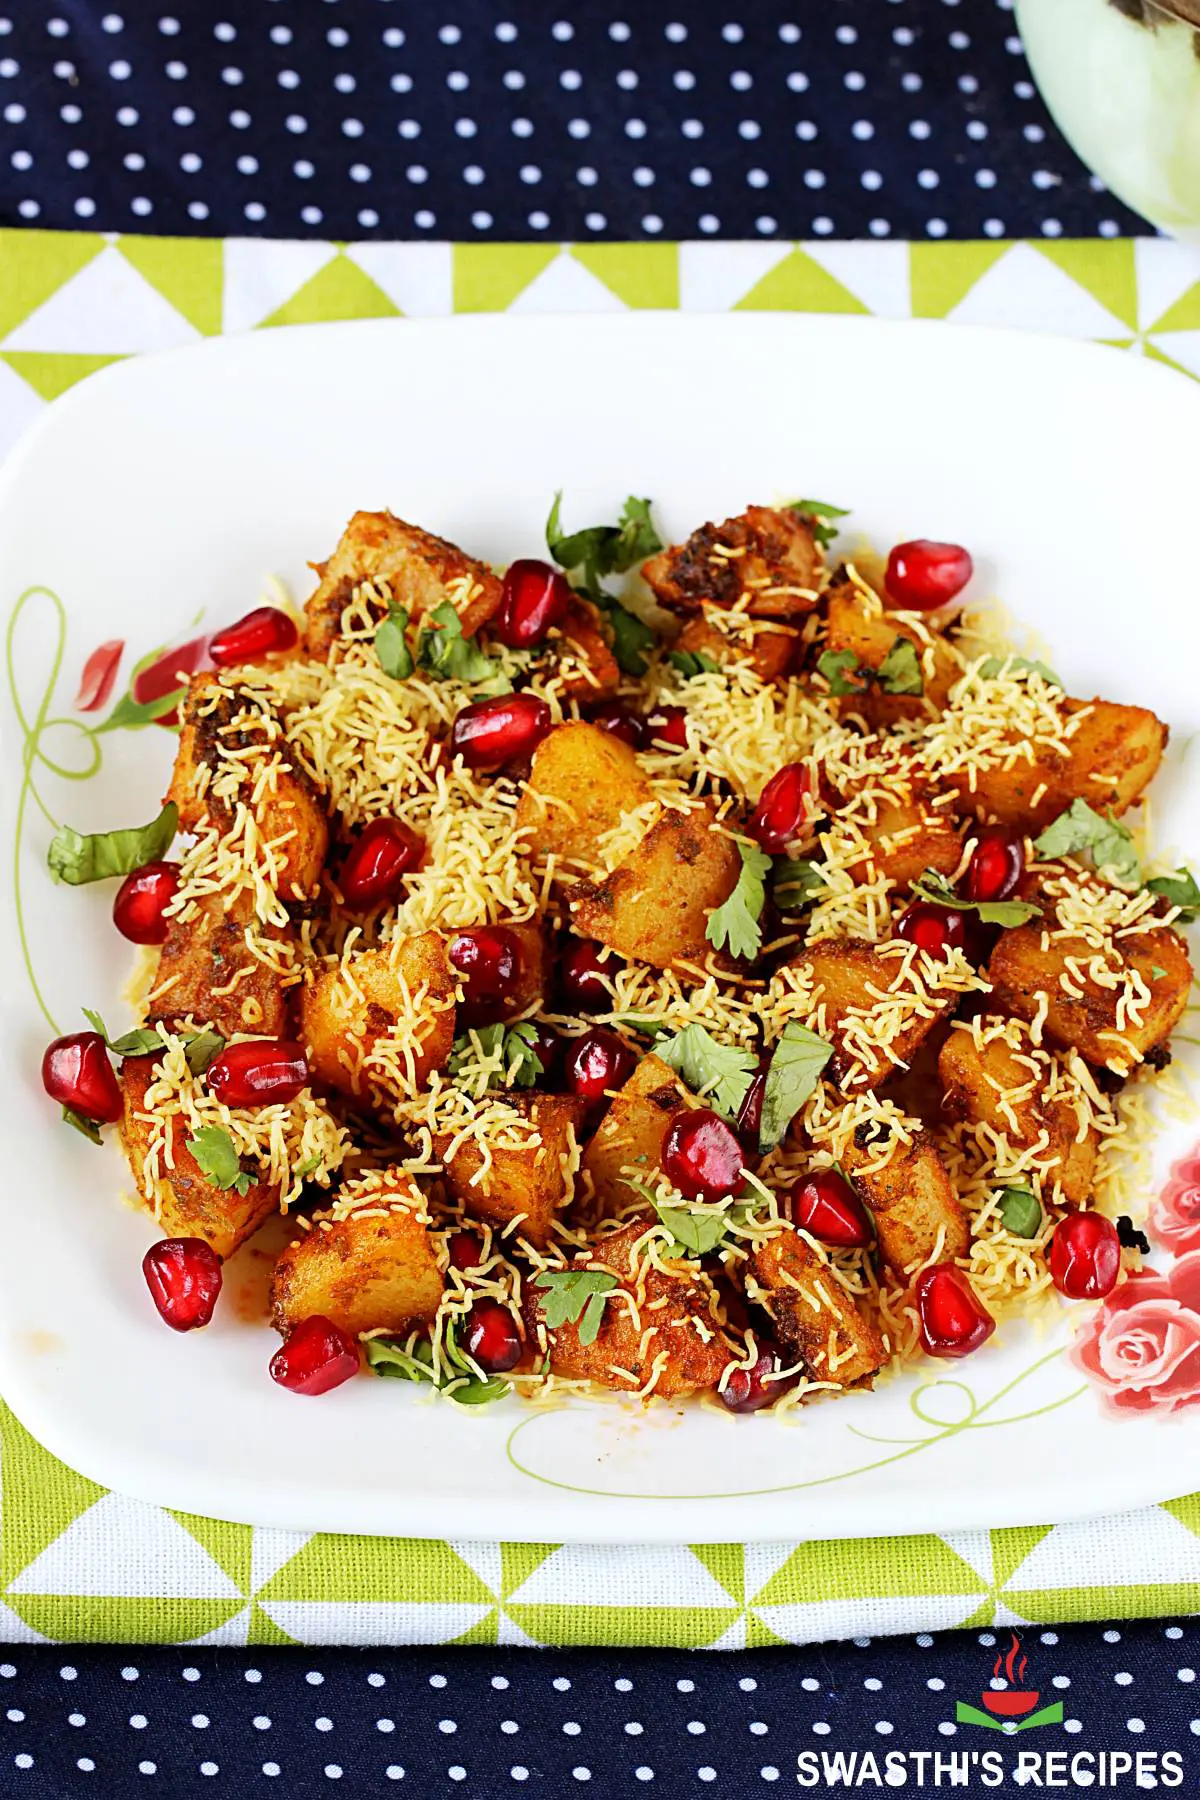 aloo chaat garnished with sev and pomegranate arils